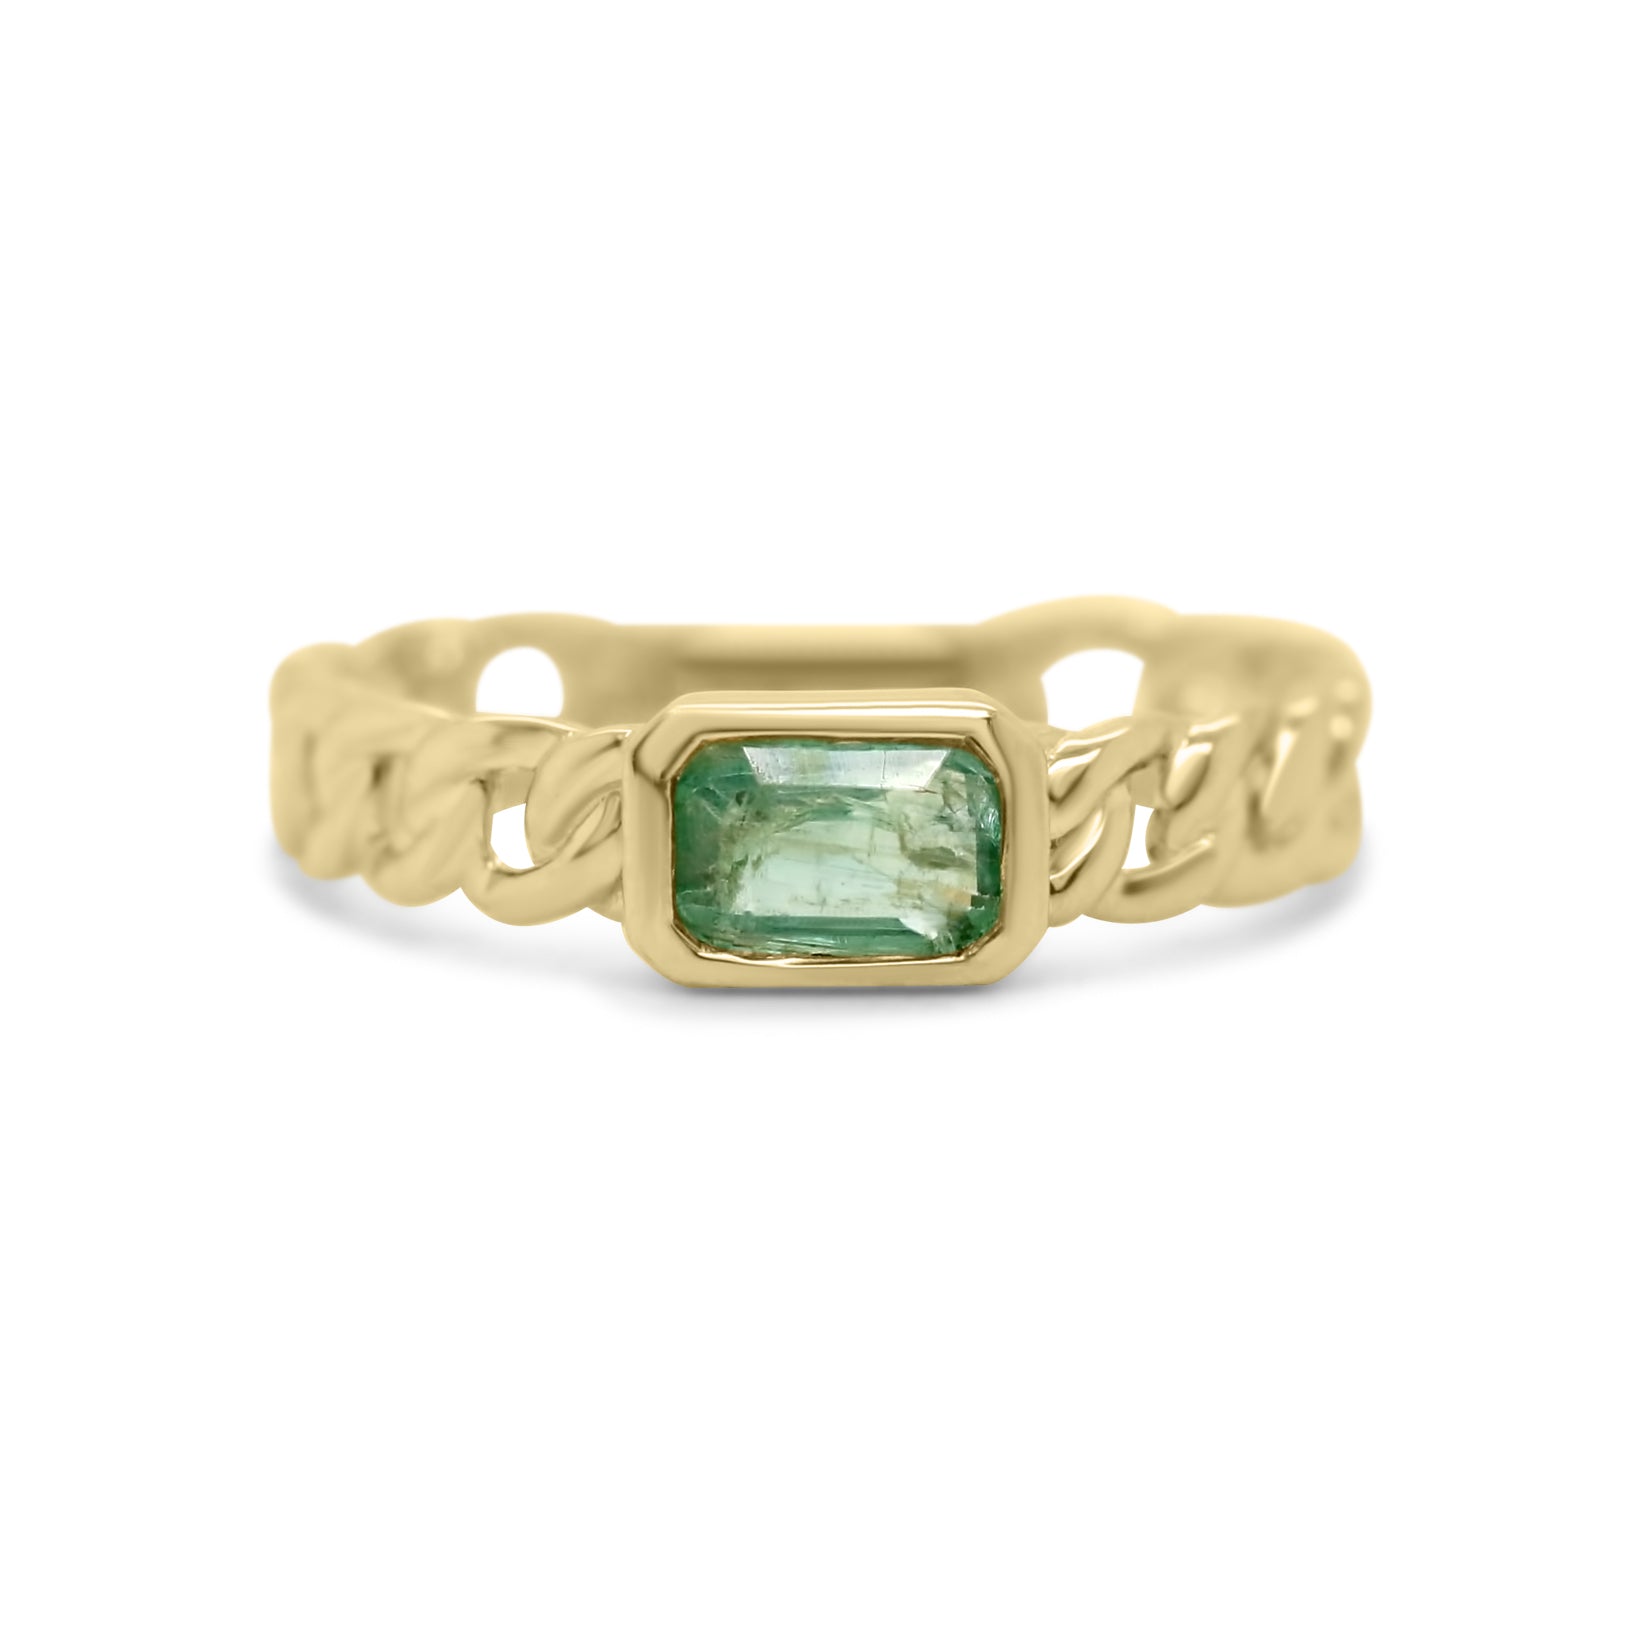 14k yellow gold bezel set emerald east to west with chain link band ring